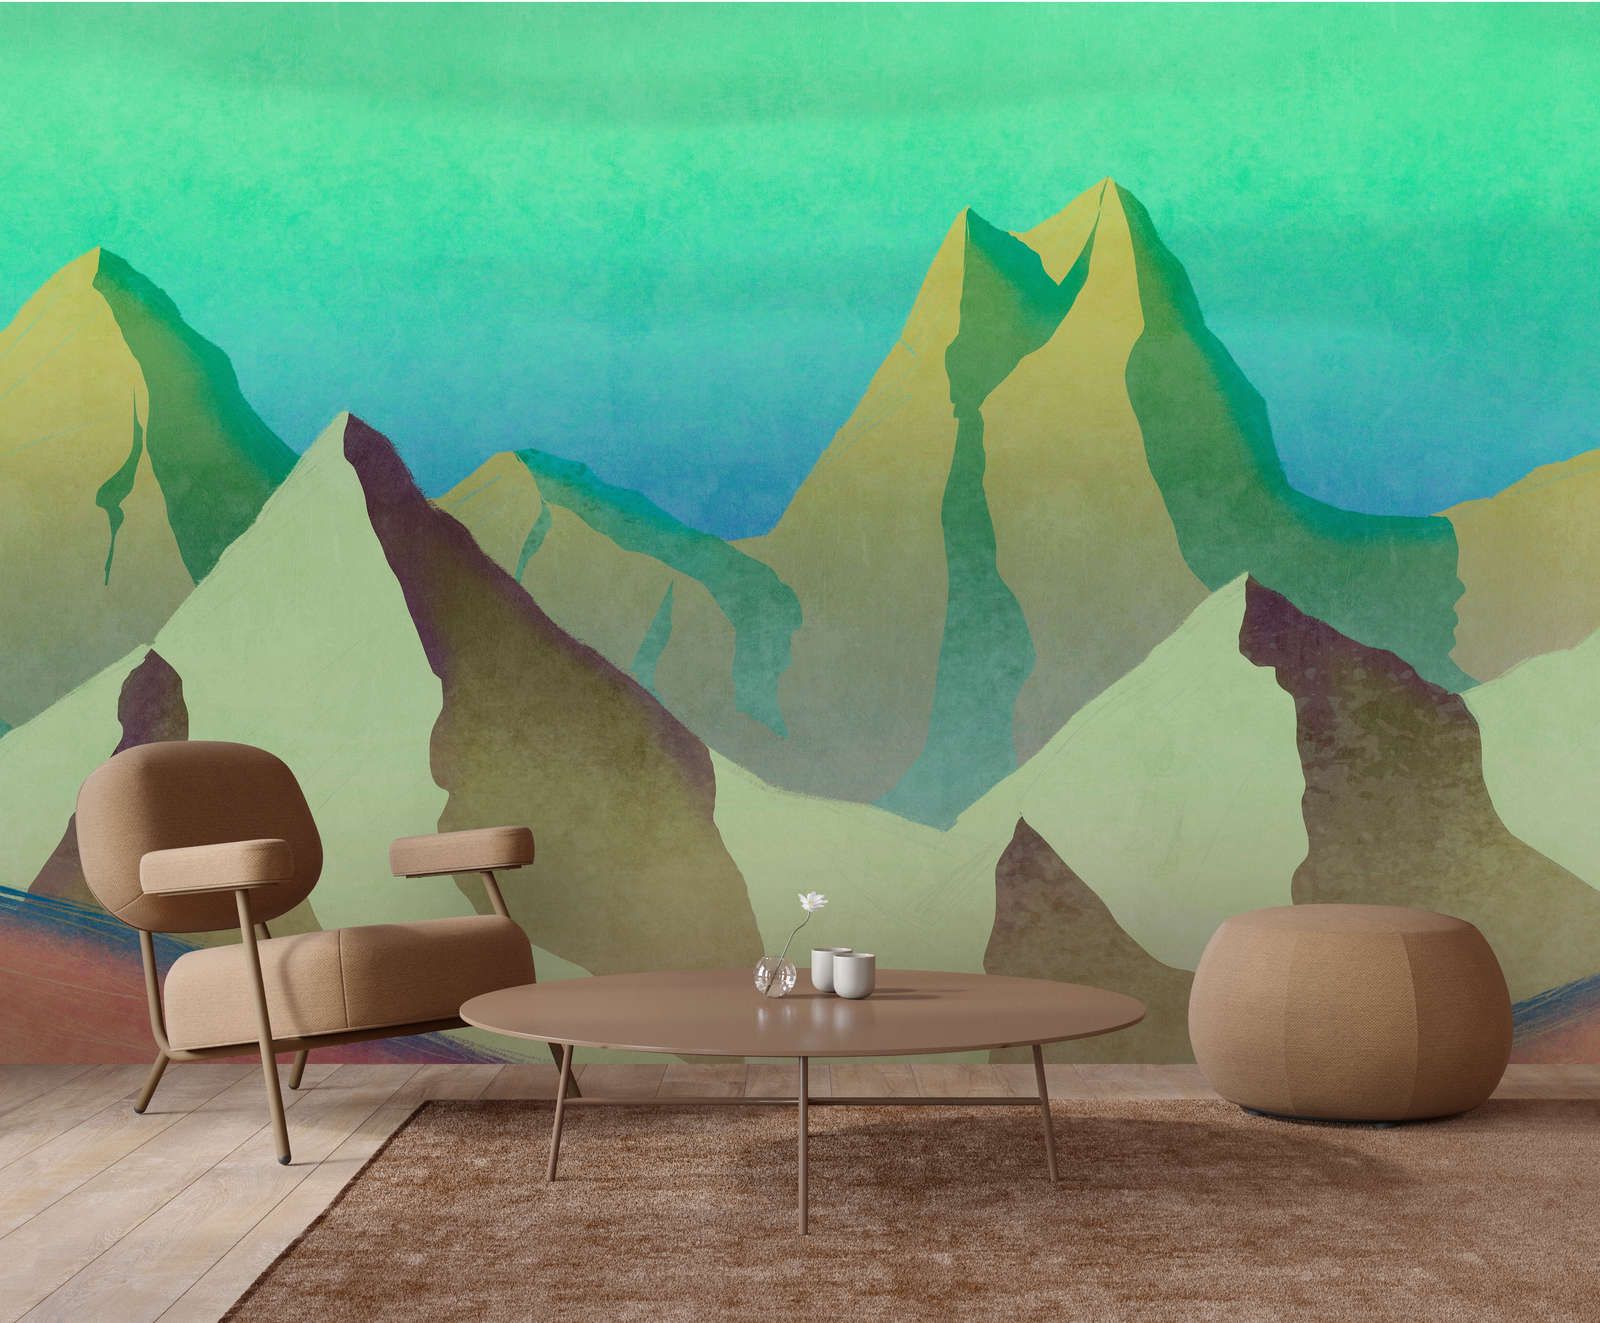             Photo wallpaper »altitude 2« - Abstract mountains in green with vintage plaster texture - Matt, smooth non-woven fabric
        